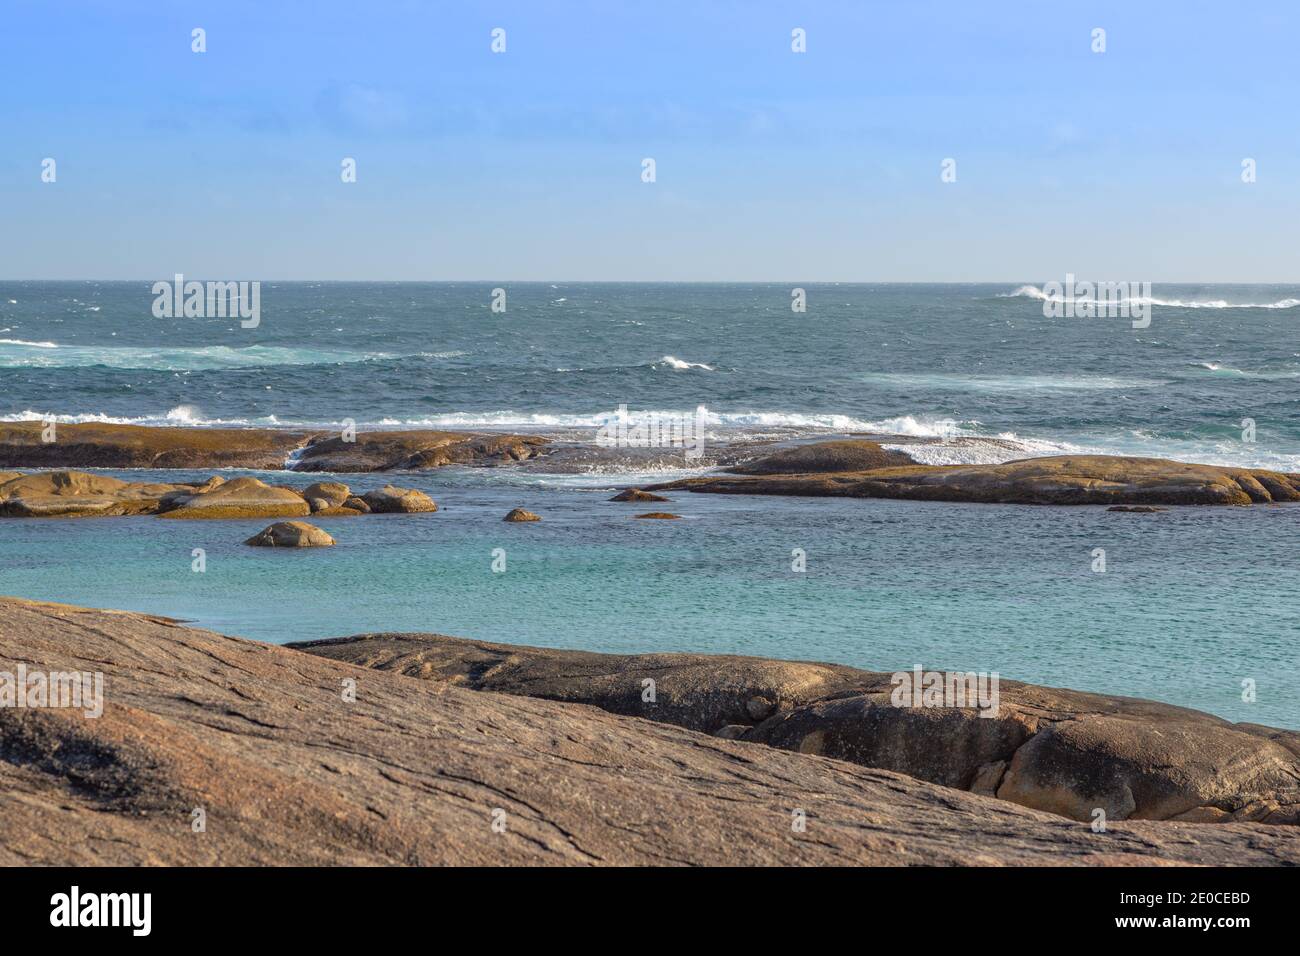 Panorama of the landscape in the William Bay National Park close to Denmark in Western Australia Stock Photo